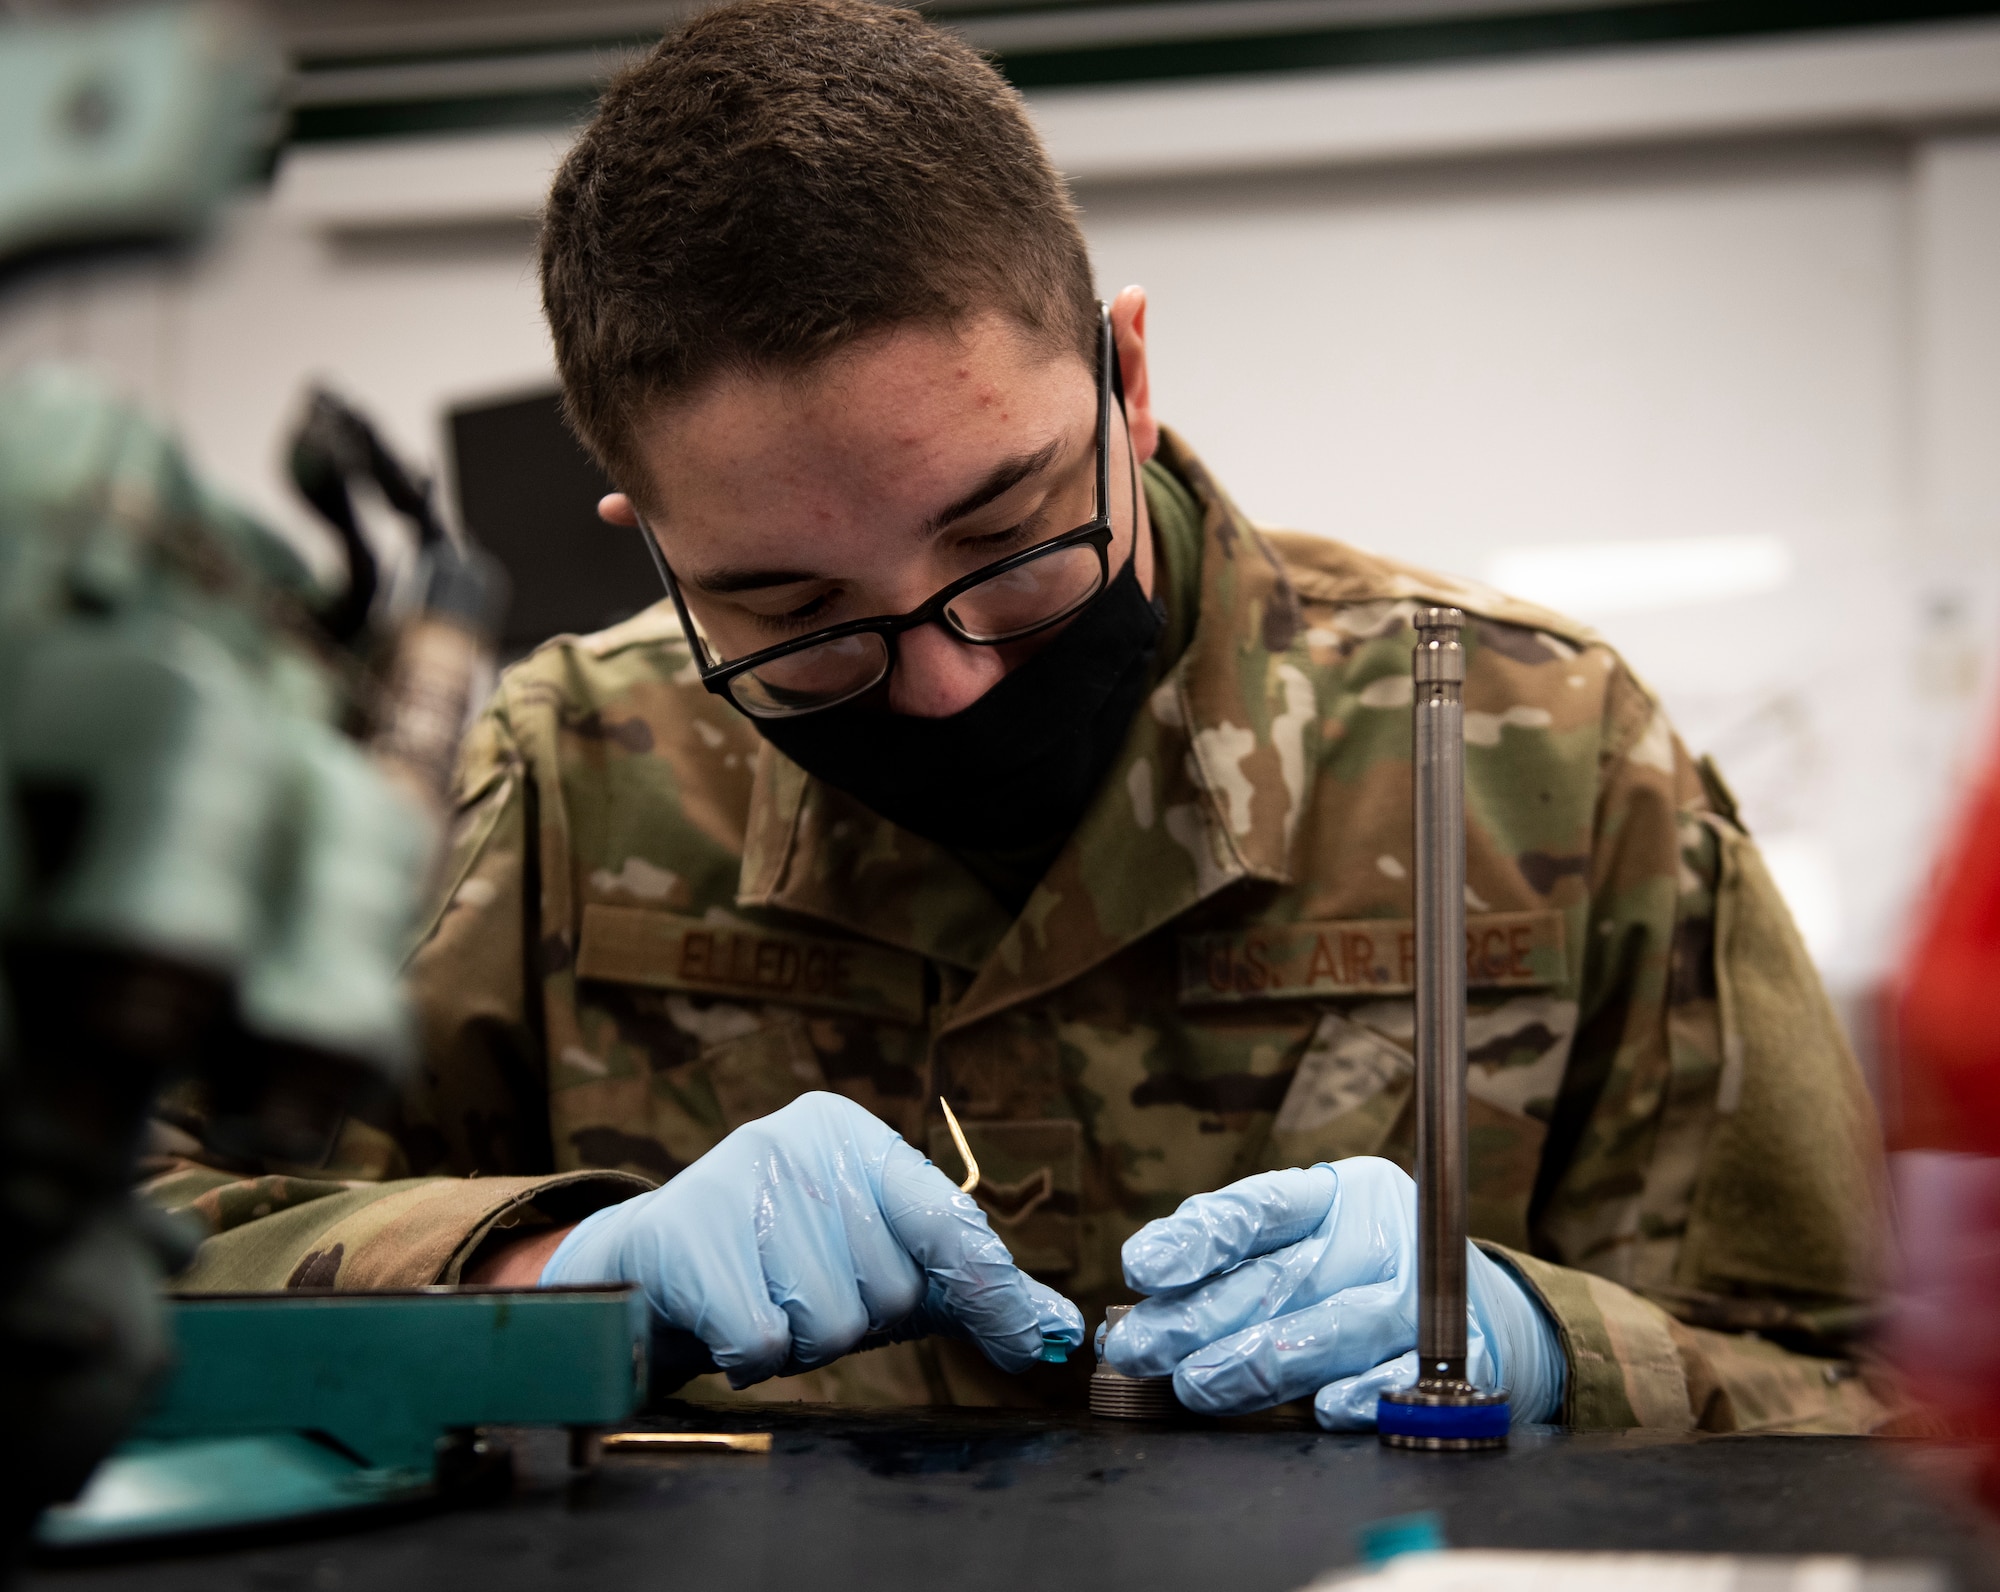 A hydraulic systems Airman assigned to the 48th Maintenance Group cleans an aircraft part at Royal Air Force Lakenheath, England, April 30, 2020. The hydraulics shop helped the 48th MXG earn the 2019 USAFE-AFAFRICA Clements McMullen Memorial Daedalian Weapon System Maintenance Trophy for a third consecutive year. (U.S. Air Force photo by Airman 1st Class Madeline Herzog)